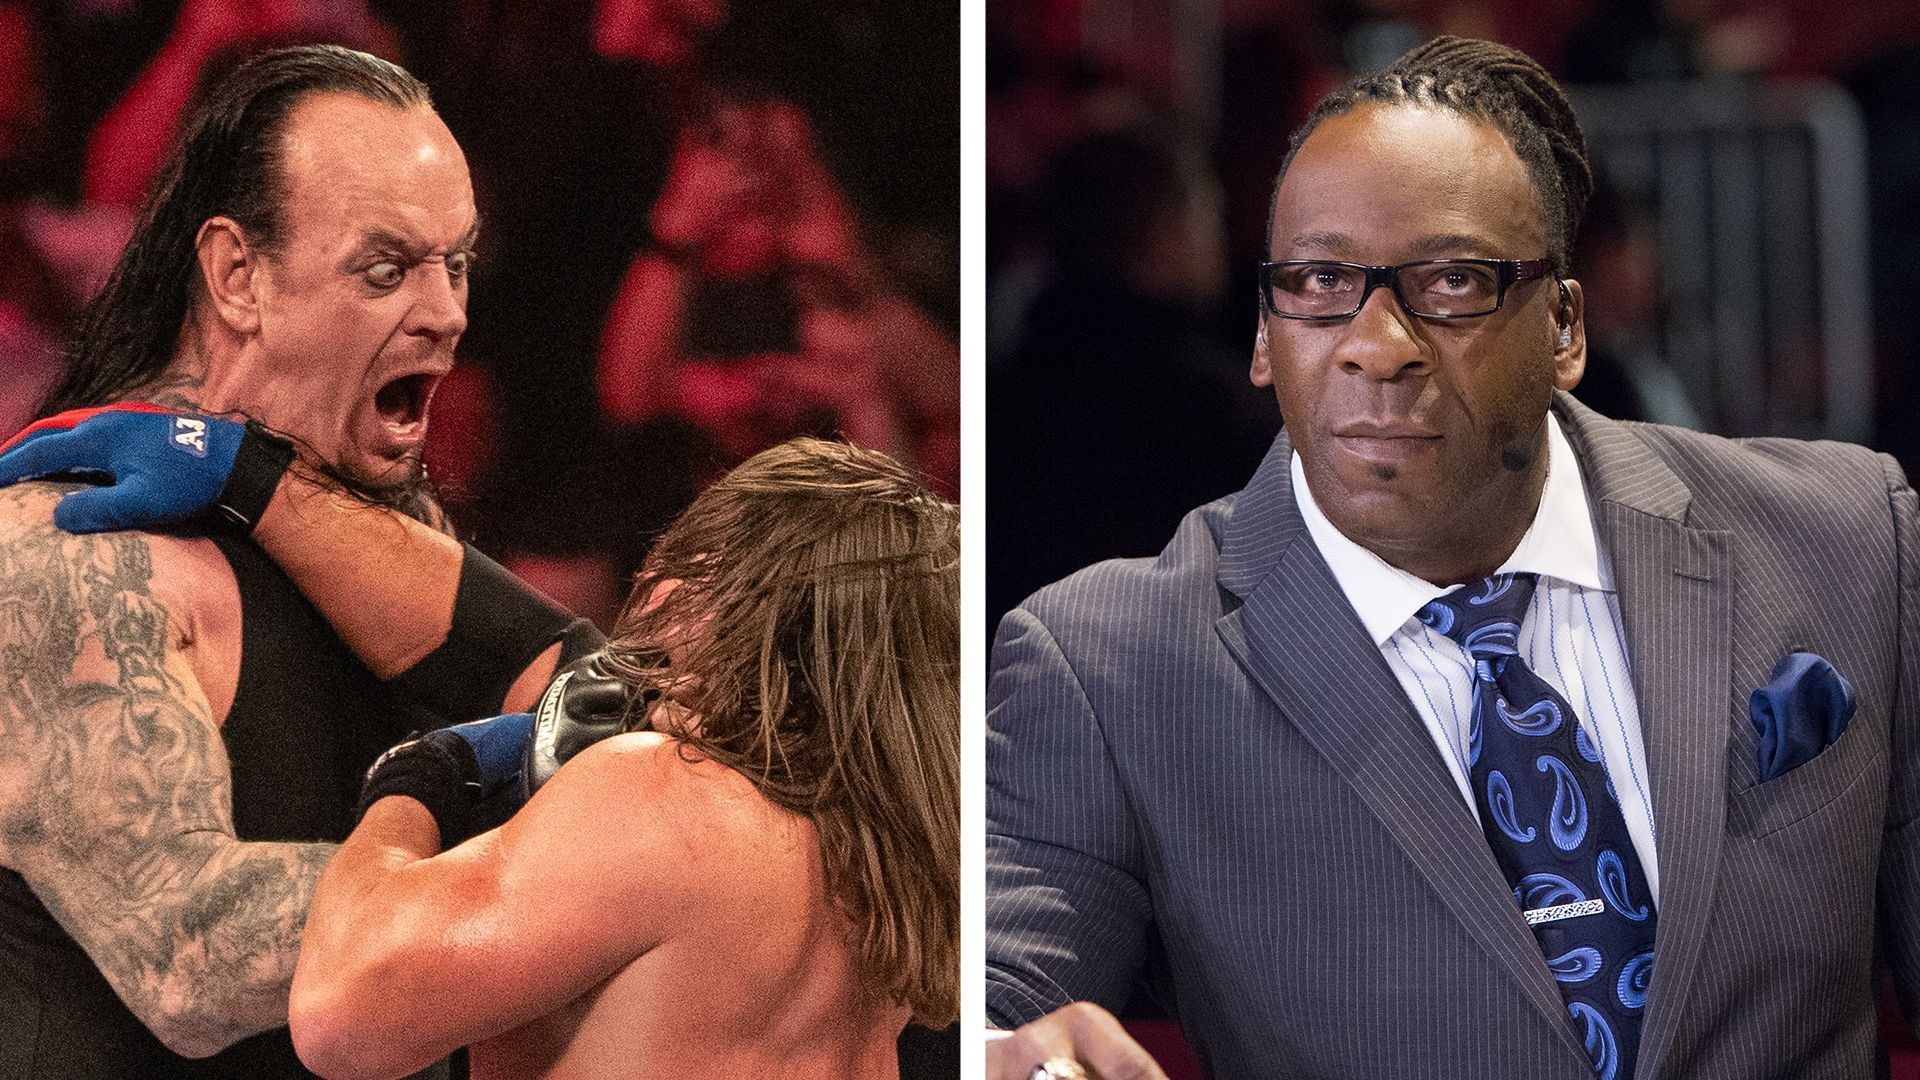 Major matches and moments took place this week in WWE history